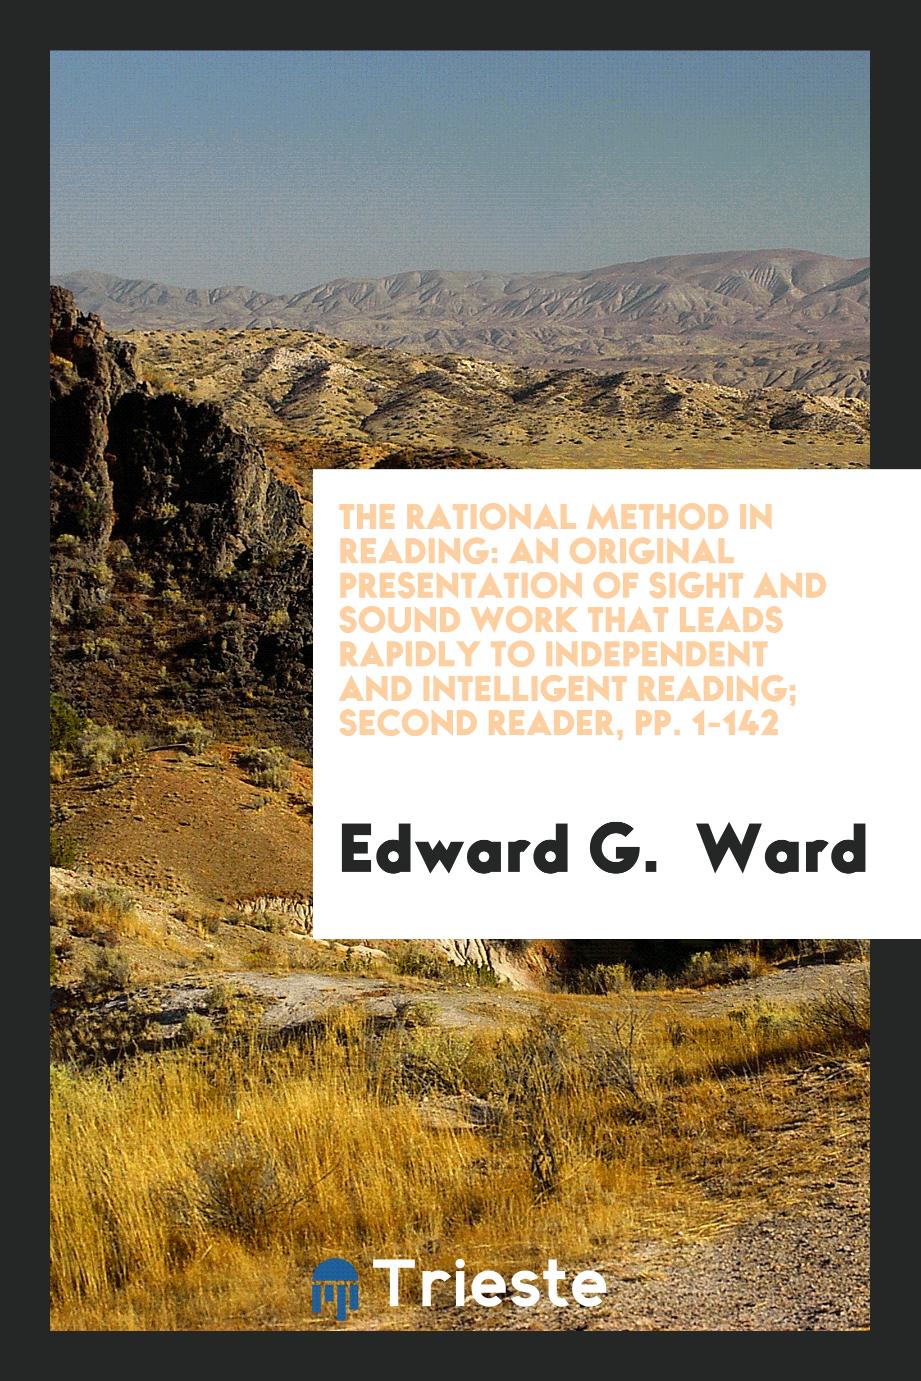 The Rational Method in Reading: An Original Presentation of Sight and Sound Work that Leads Rapidly to Independent and Intelligent Reading; Second Reader, pp. 1-142